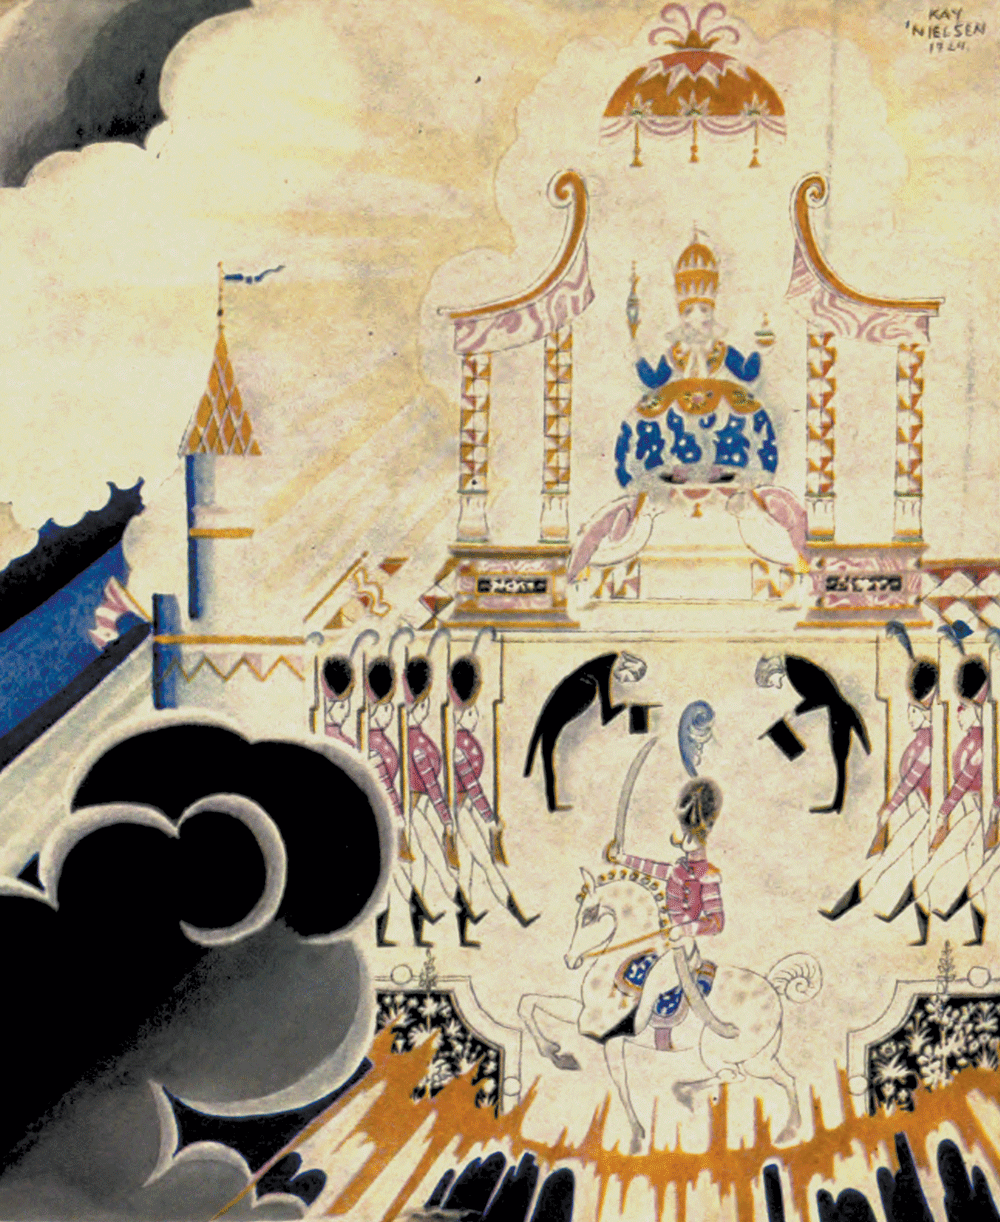 Hansel and Gretel and Other Brothers Grimm Stories – Illustrated by Kay Nielsen